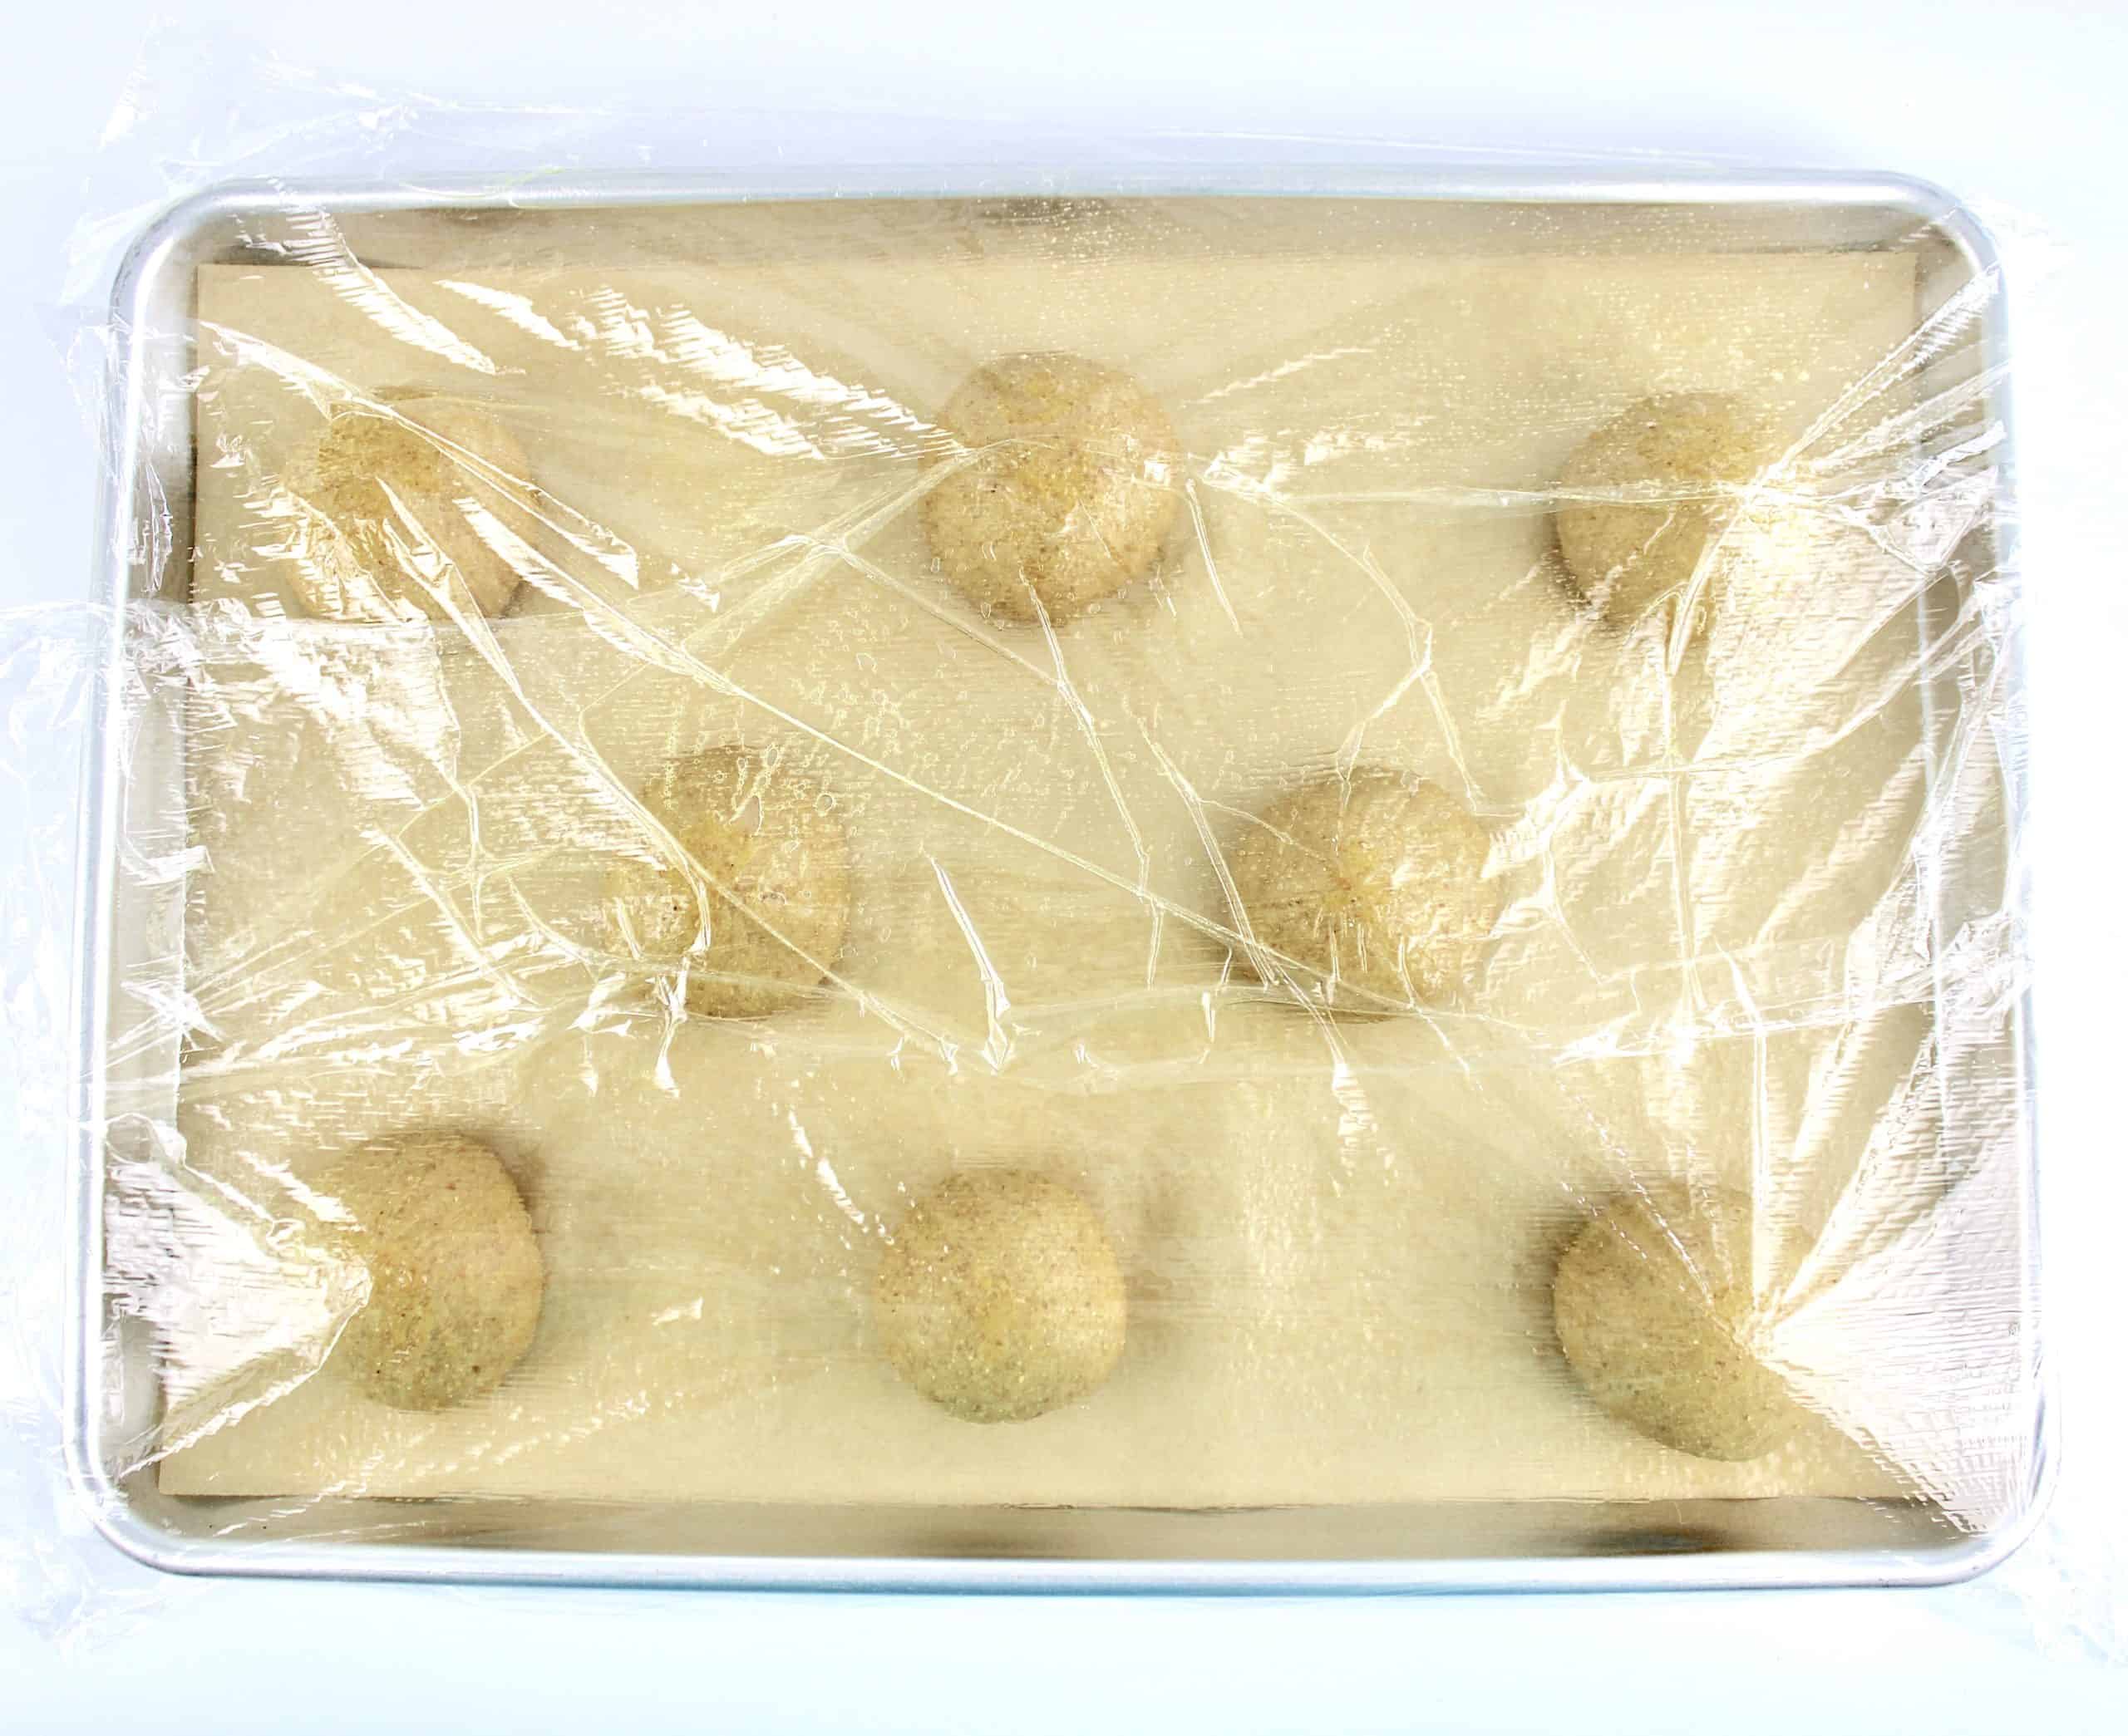 8 dough balls in baking sheet with parchment and plastic wrap on top